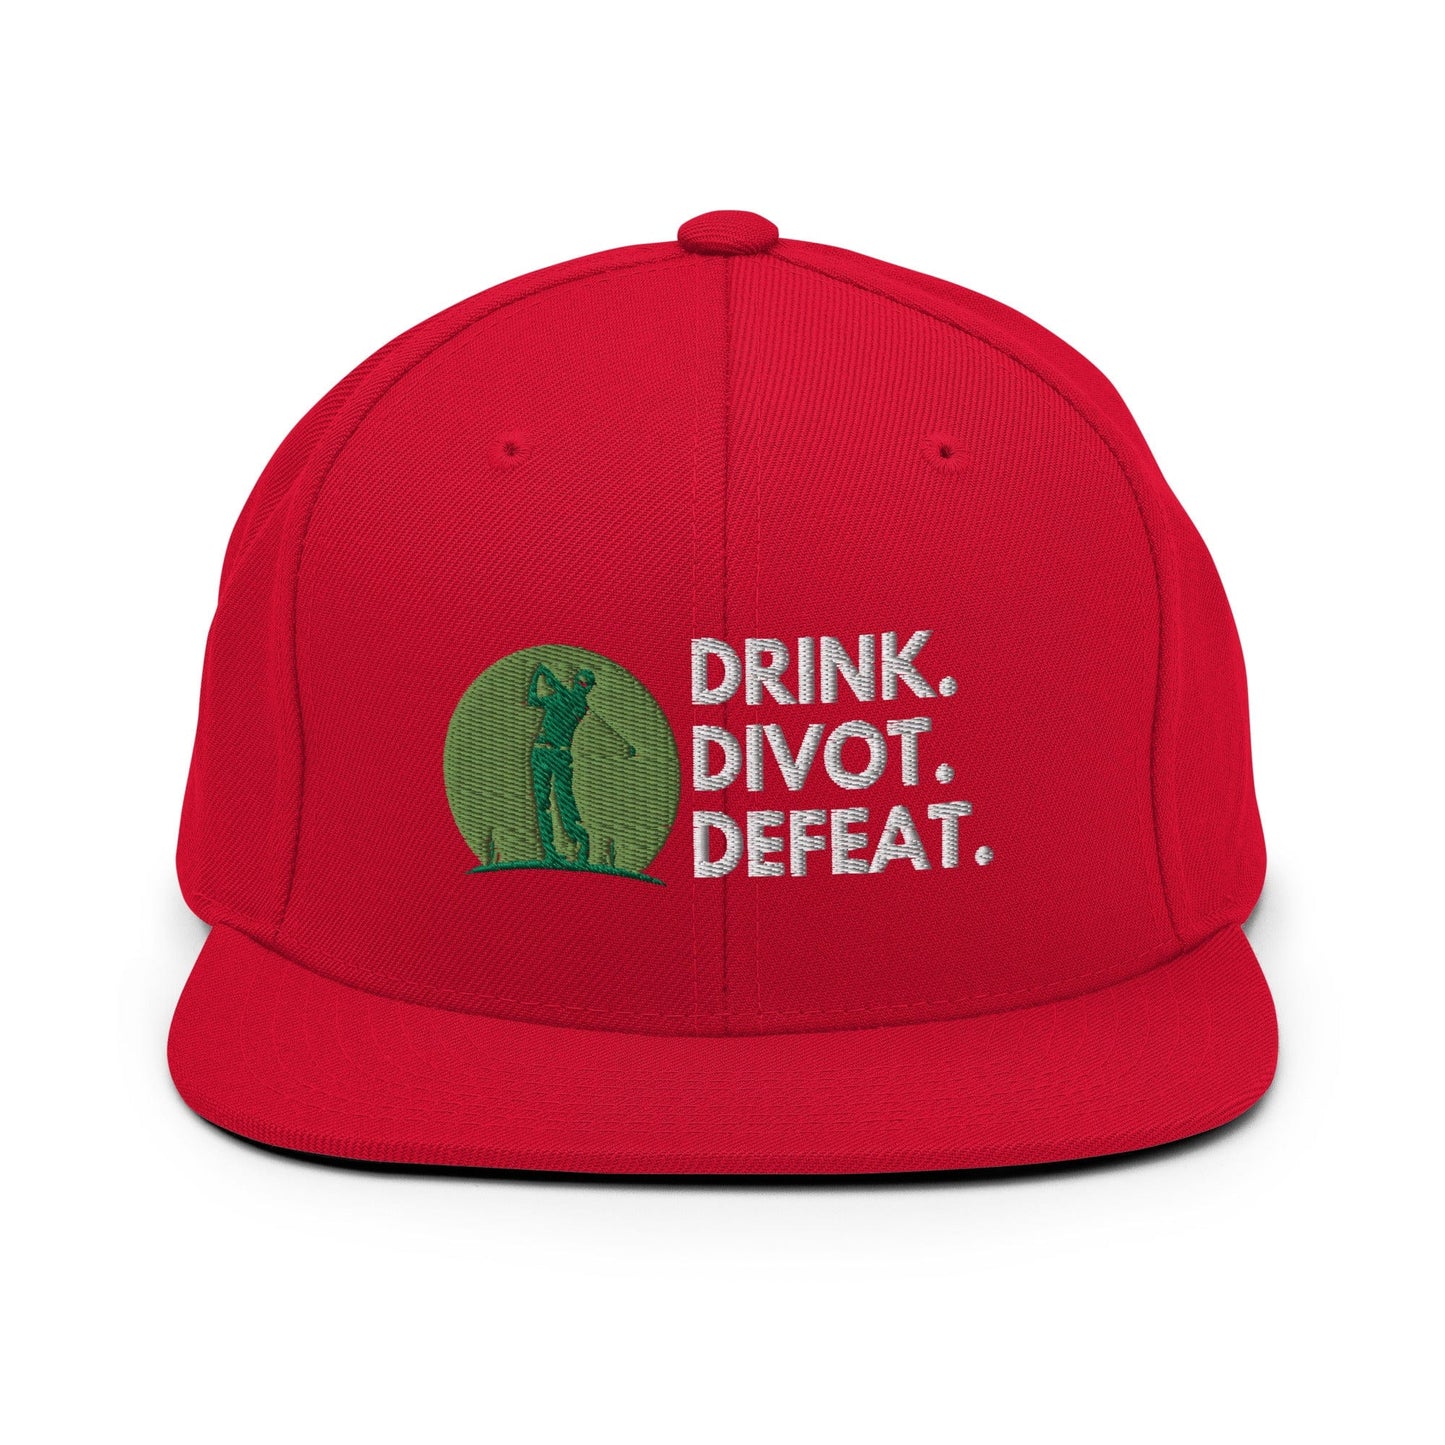 Funny Golfer Gifts  Snapback Hat Red Drink. Divot. Defeat Snapback Hat